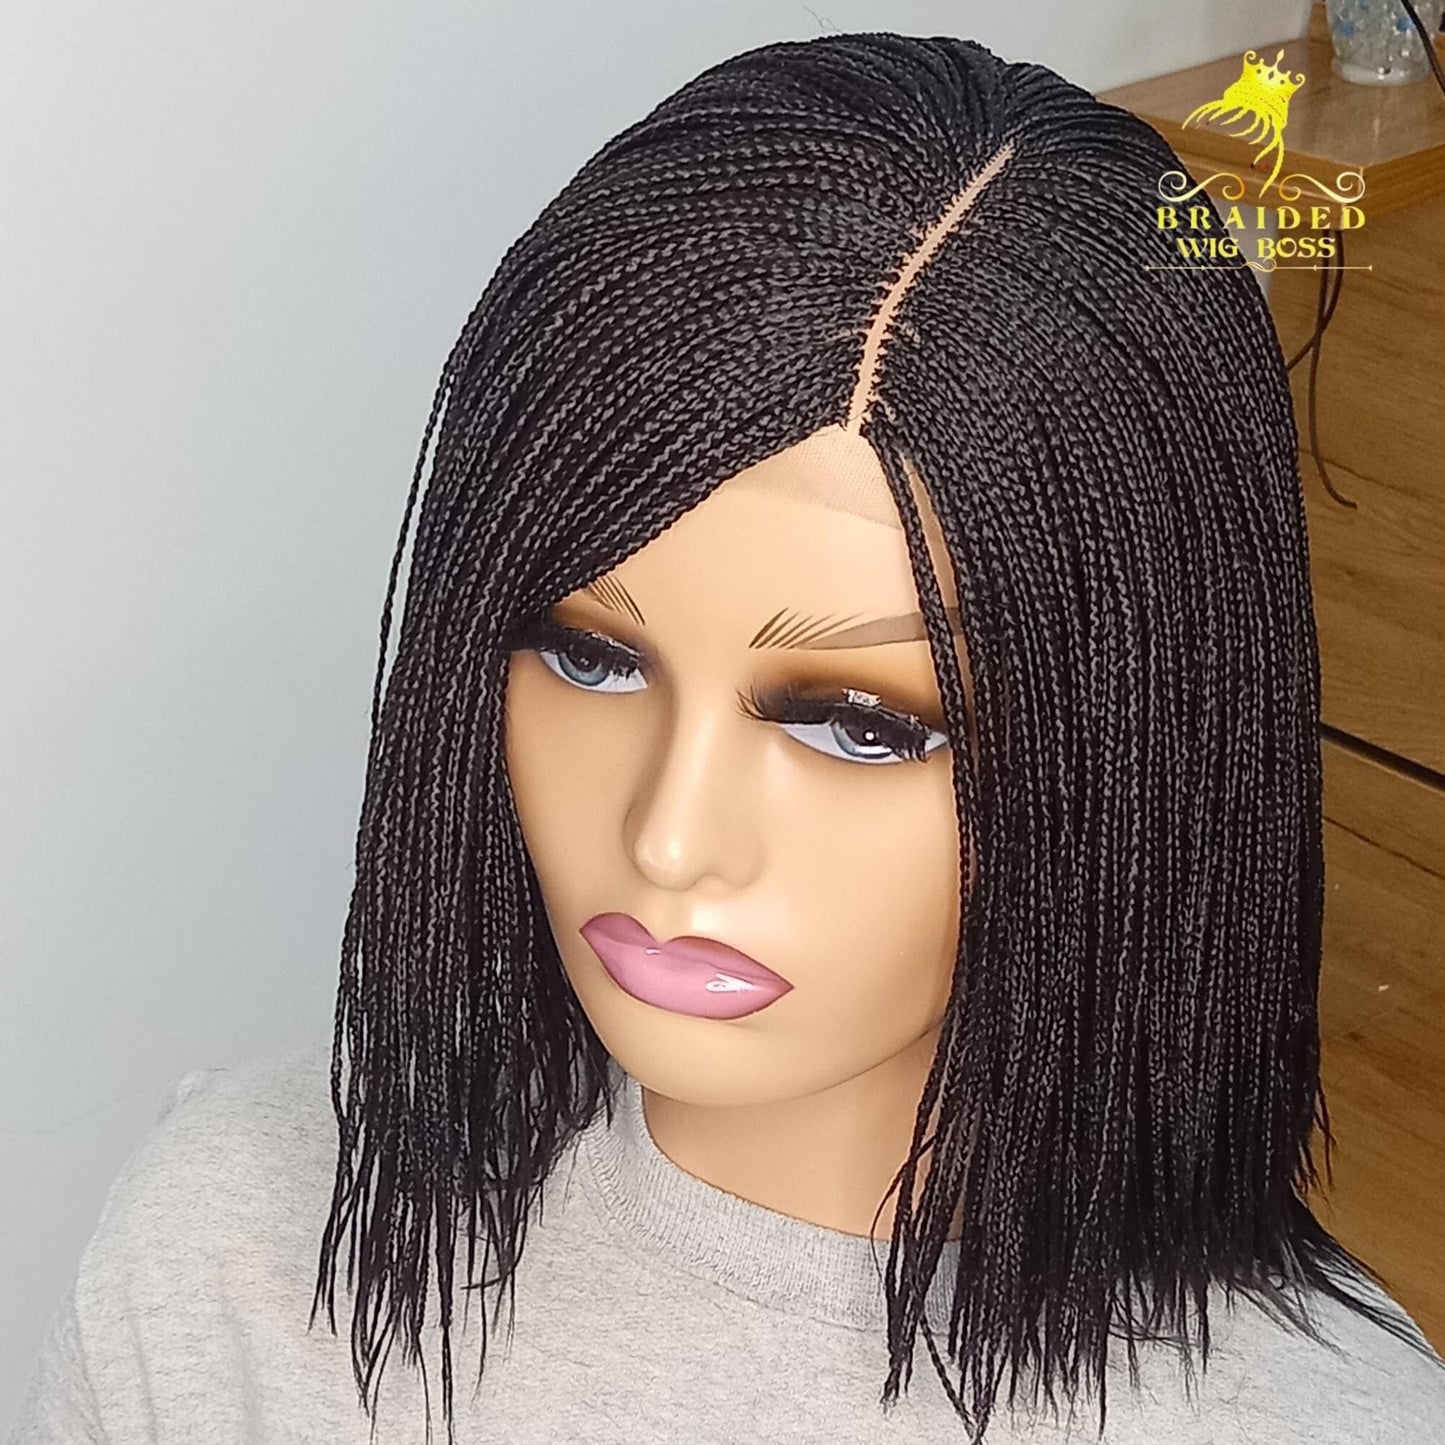 10 Inches Short Micro Braid Wig on 2 By 4 Lace Front Color 2 Without Baby Hairs Glueless Braided Lace Wig for Black Women